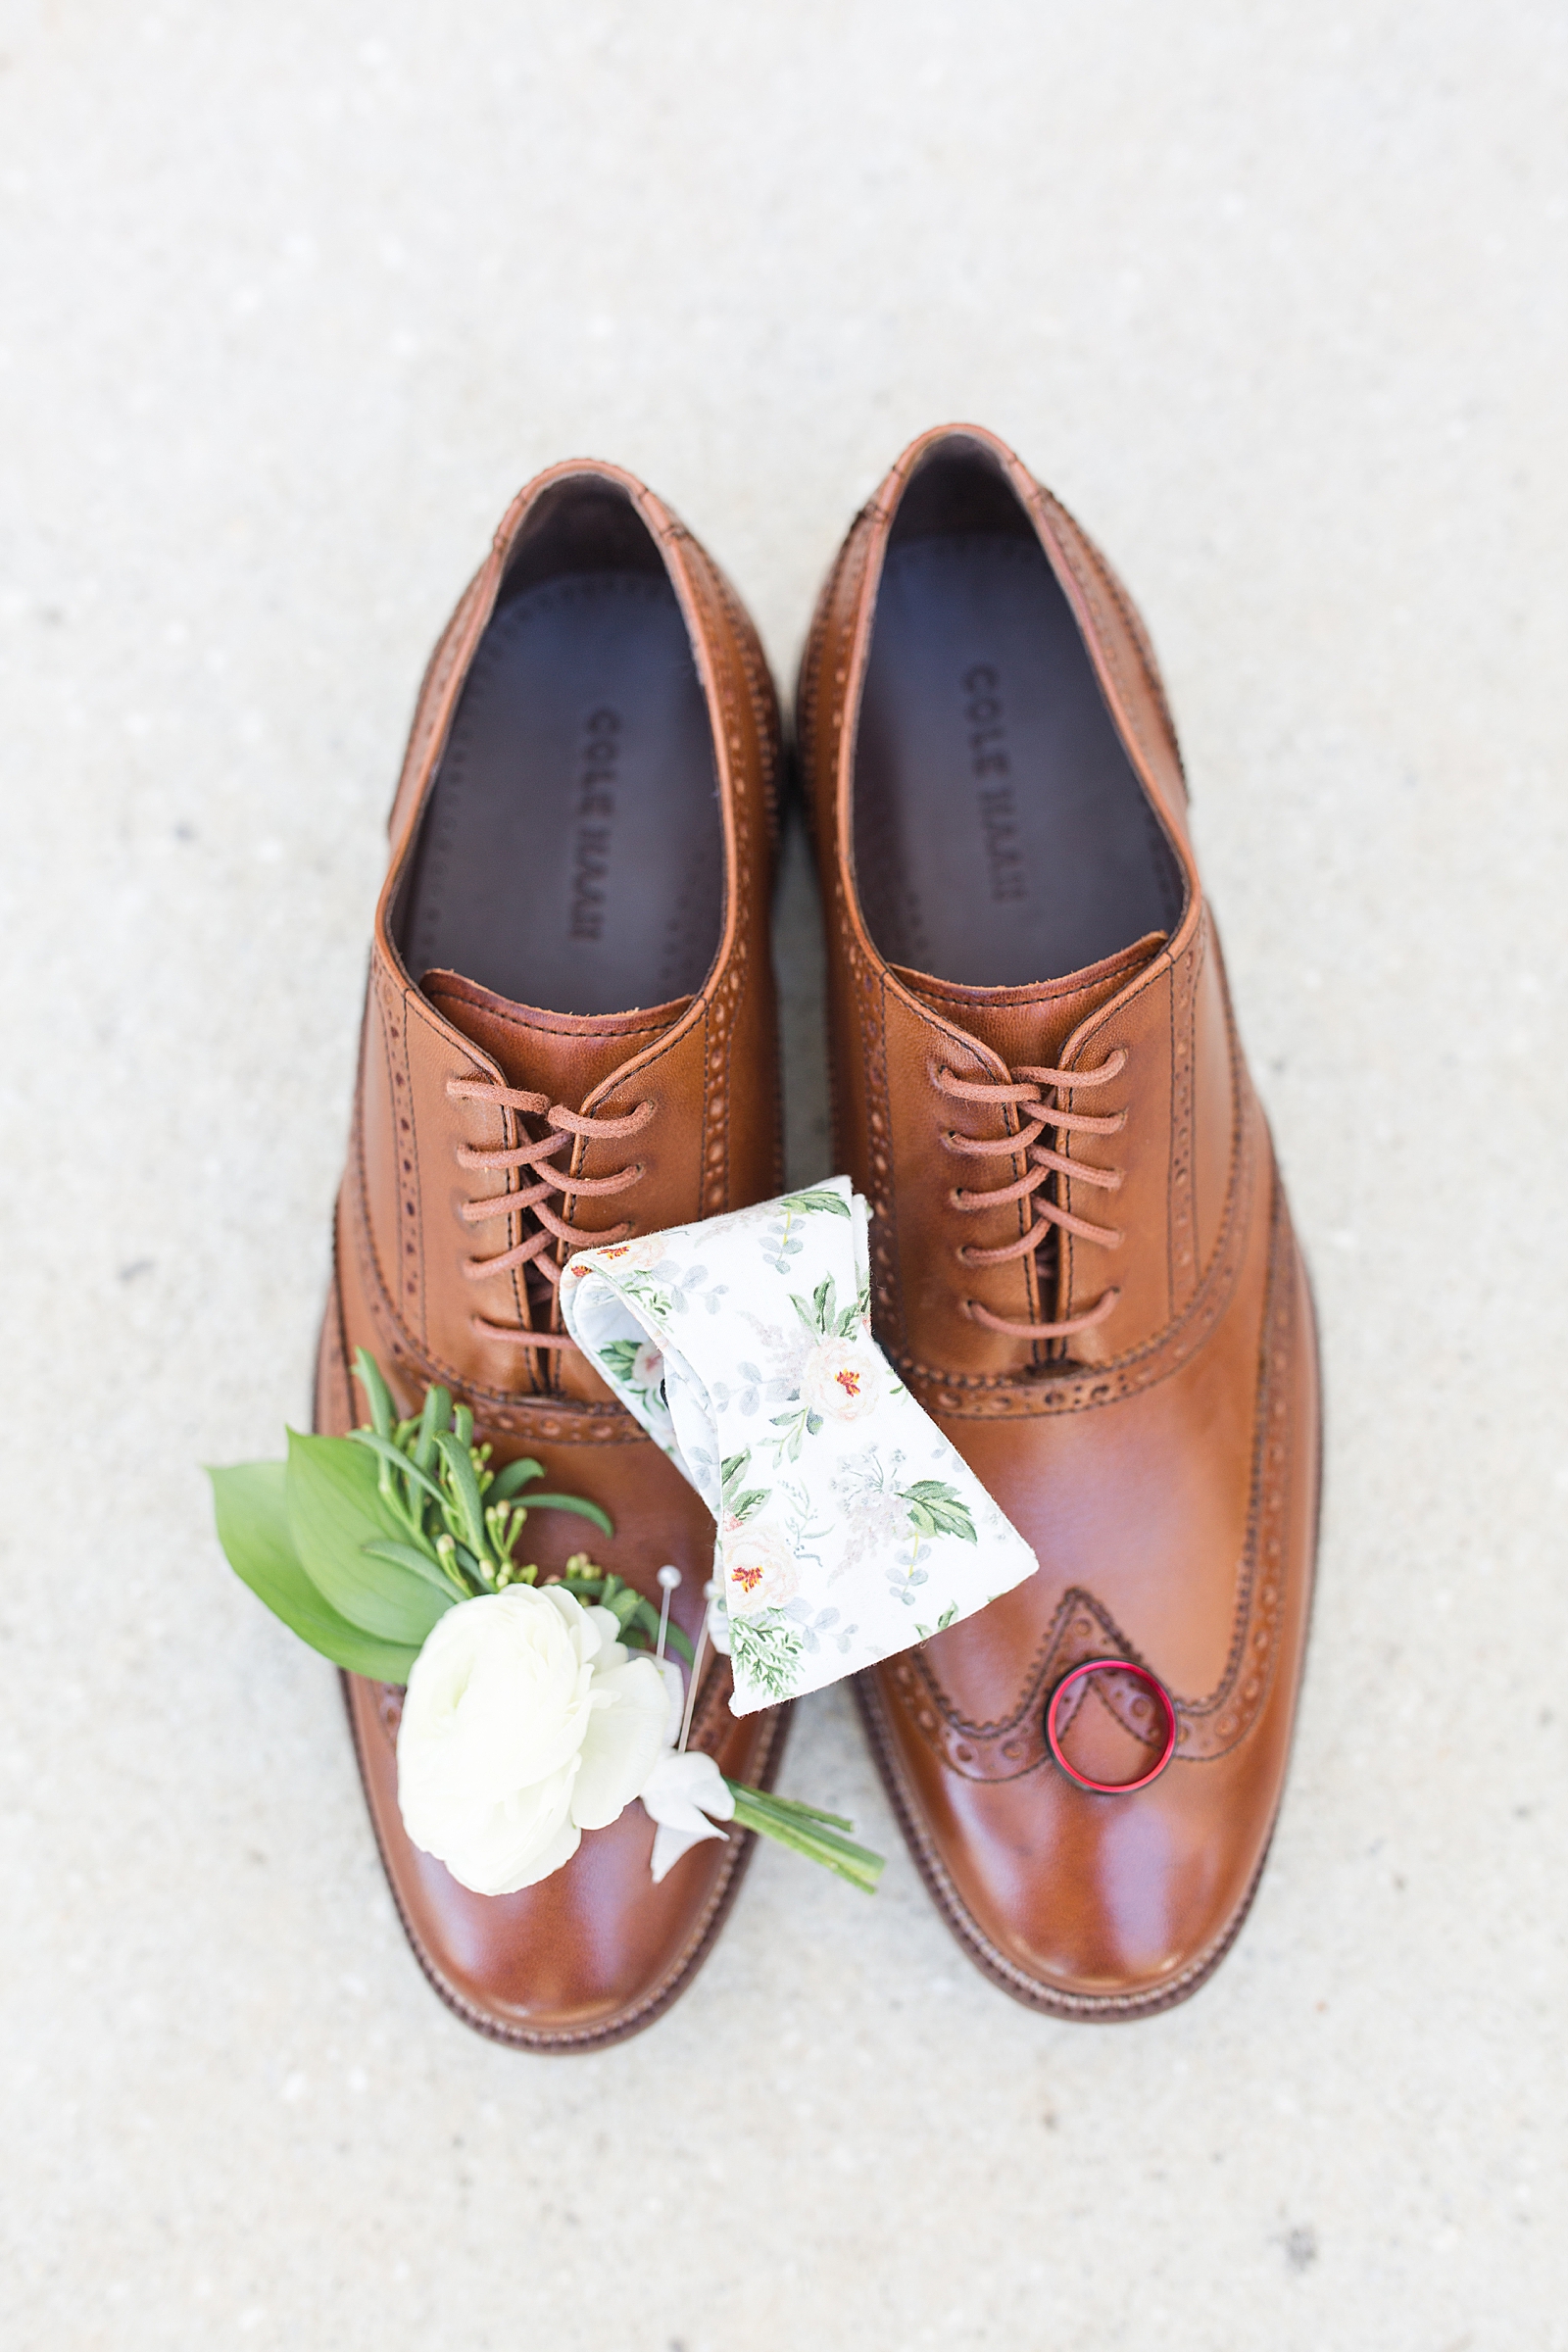 Enchanted Oaks Jacksonville Wedding Grooms Shoes bowtie ring and boutonnière Photo